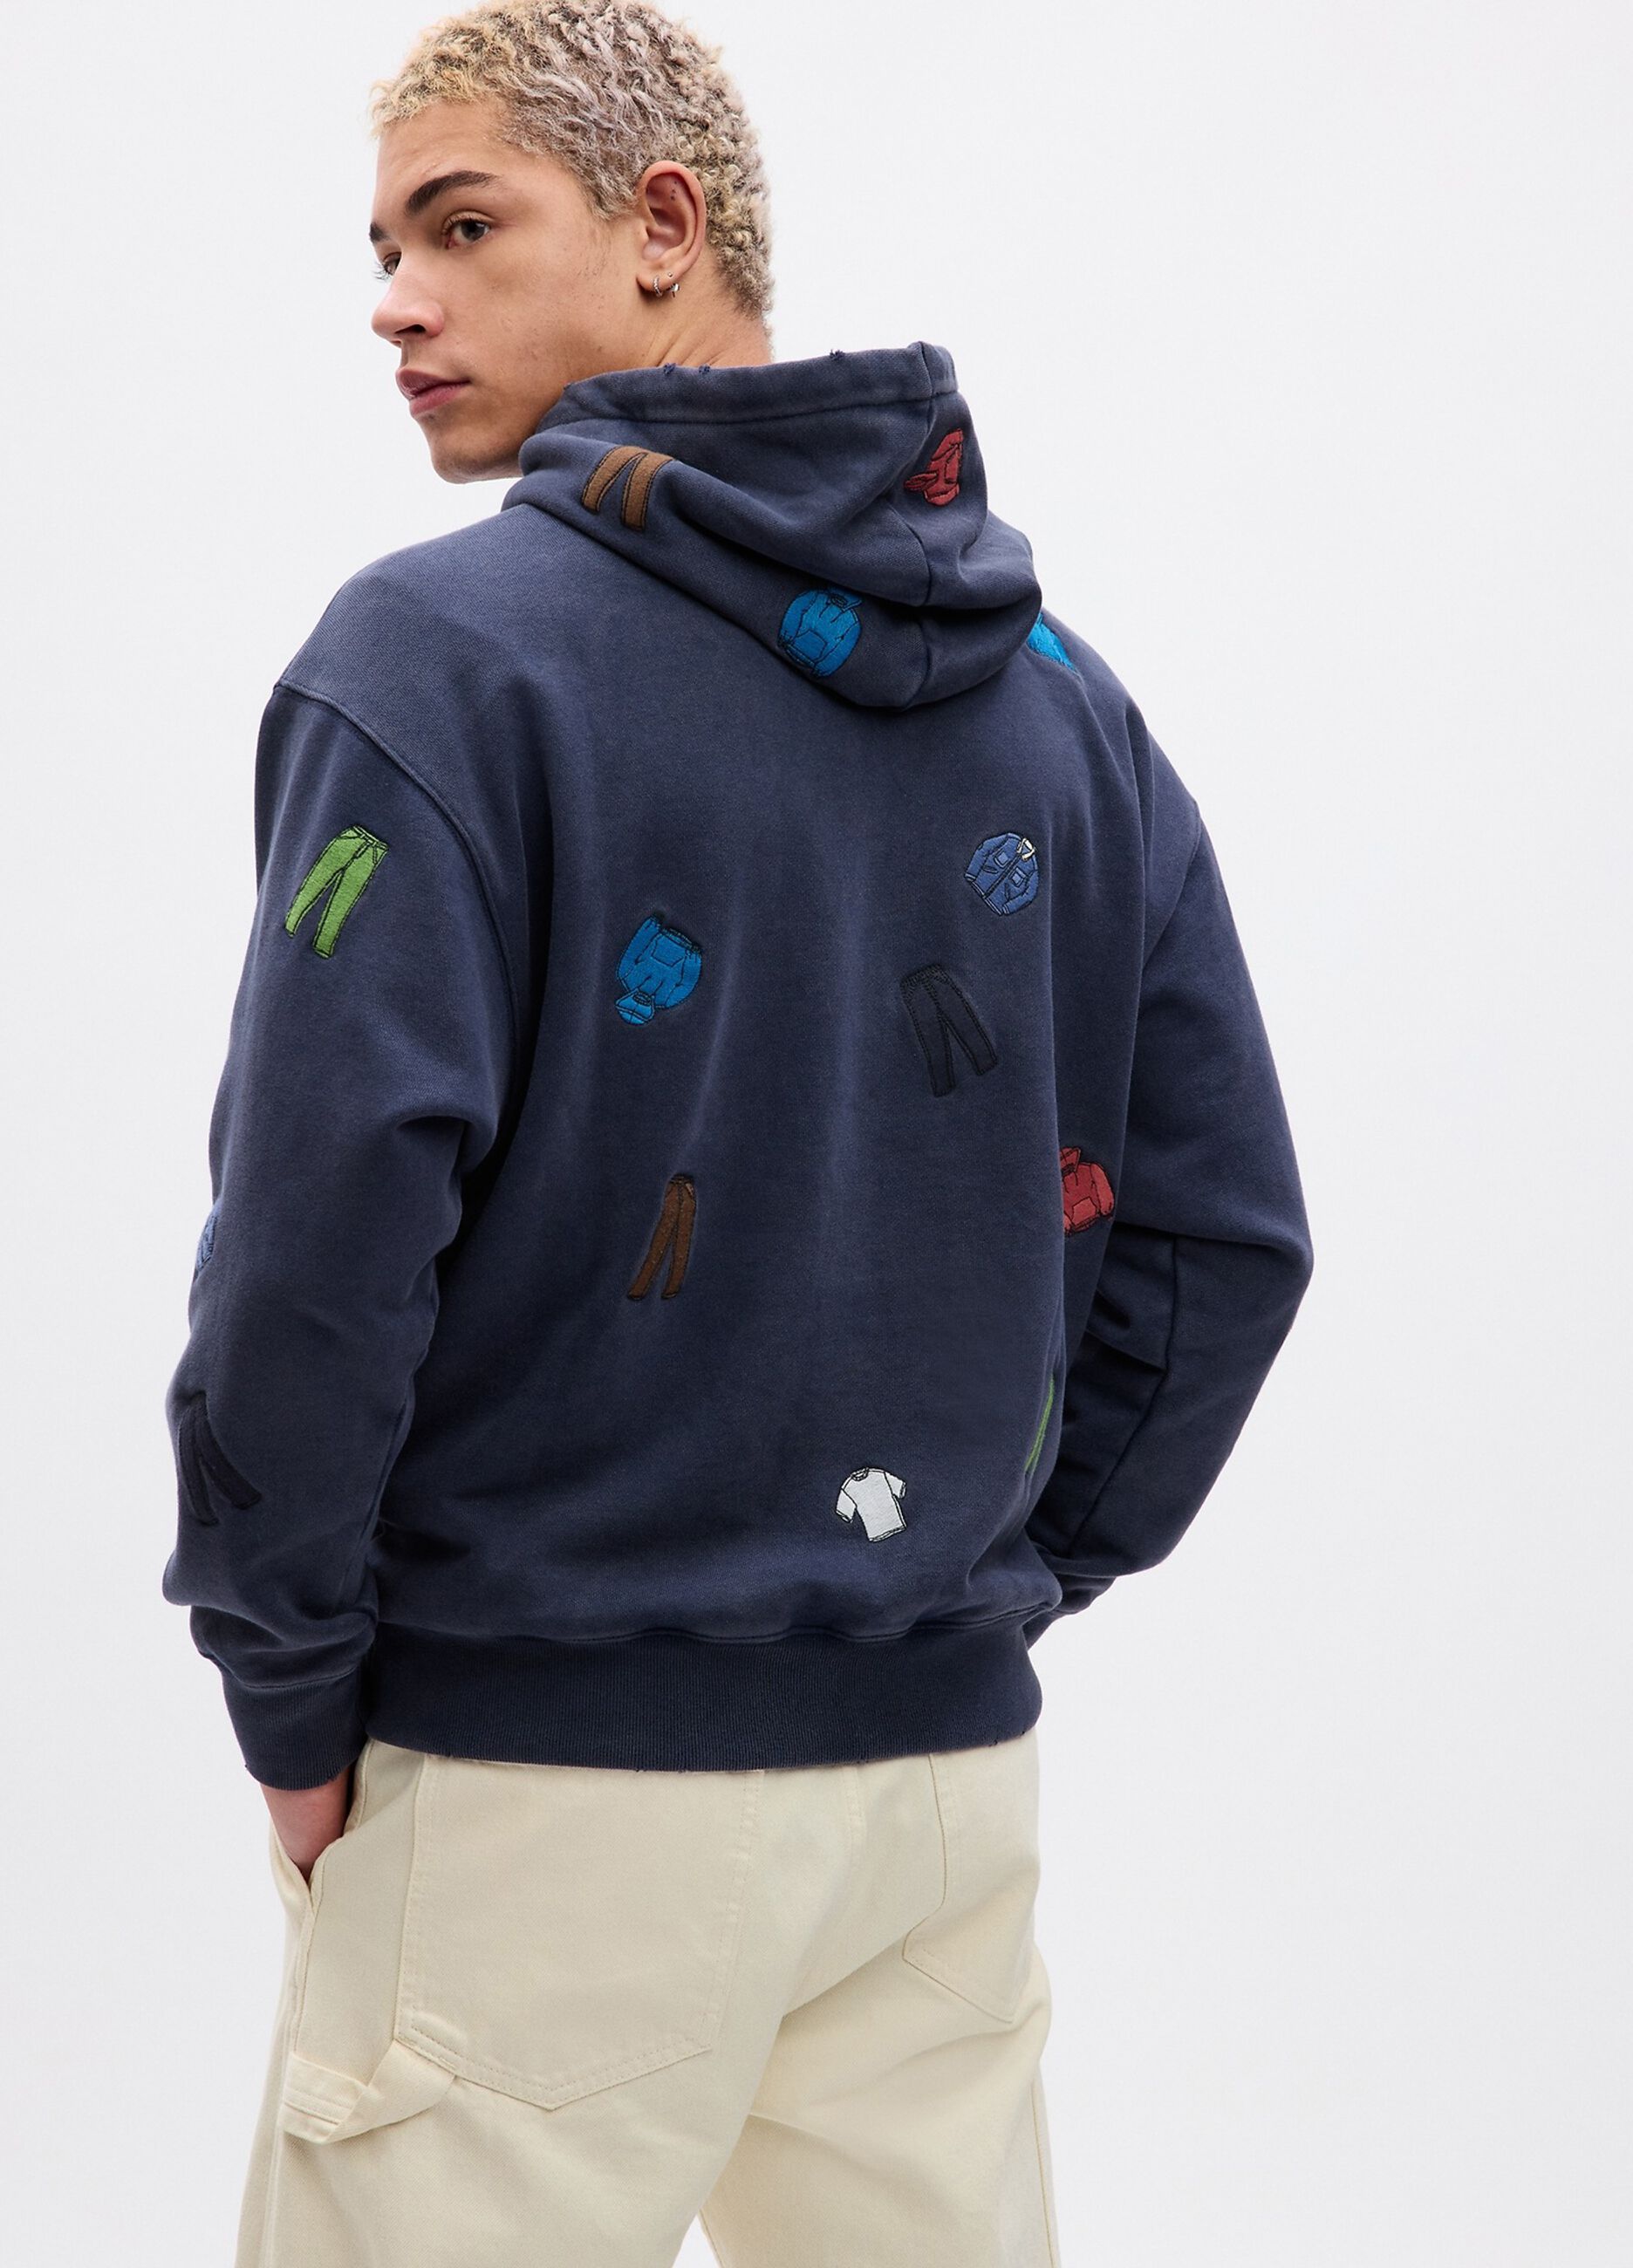 Sweatshirt with hood and all-over Sean Wotherspoon embroidery_2